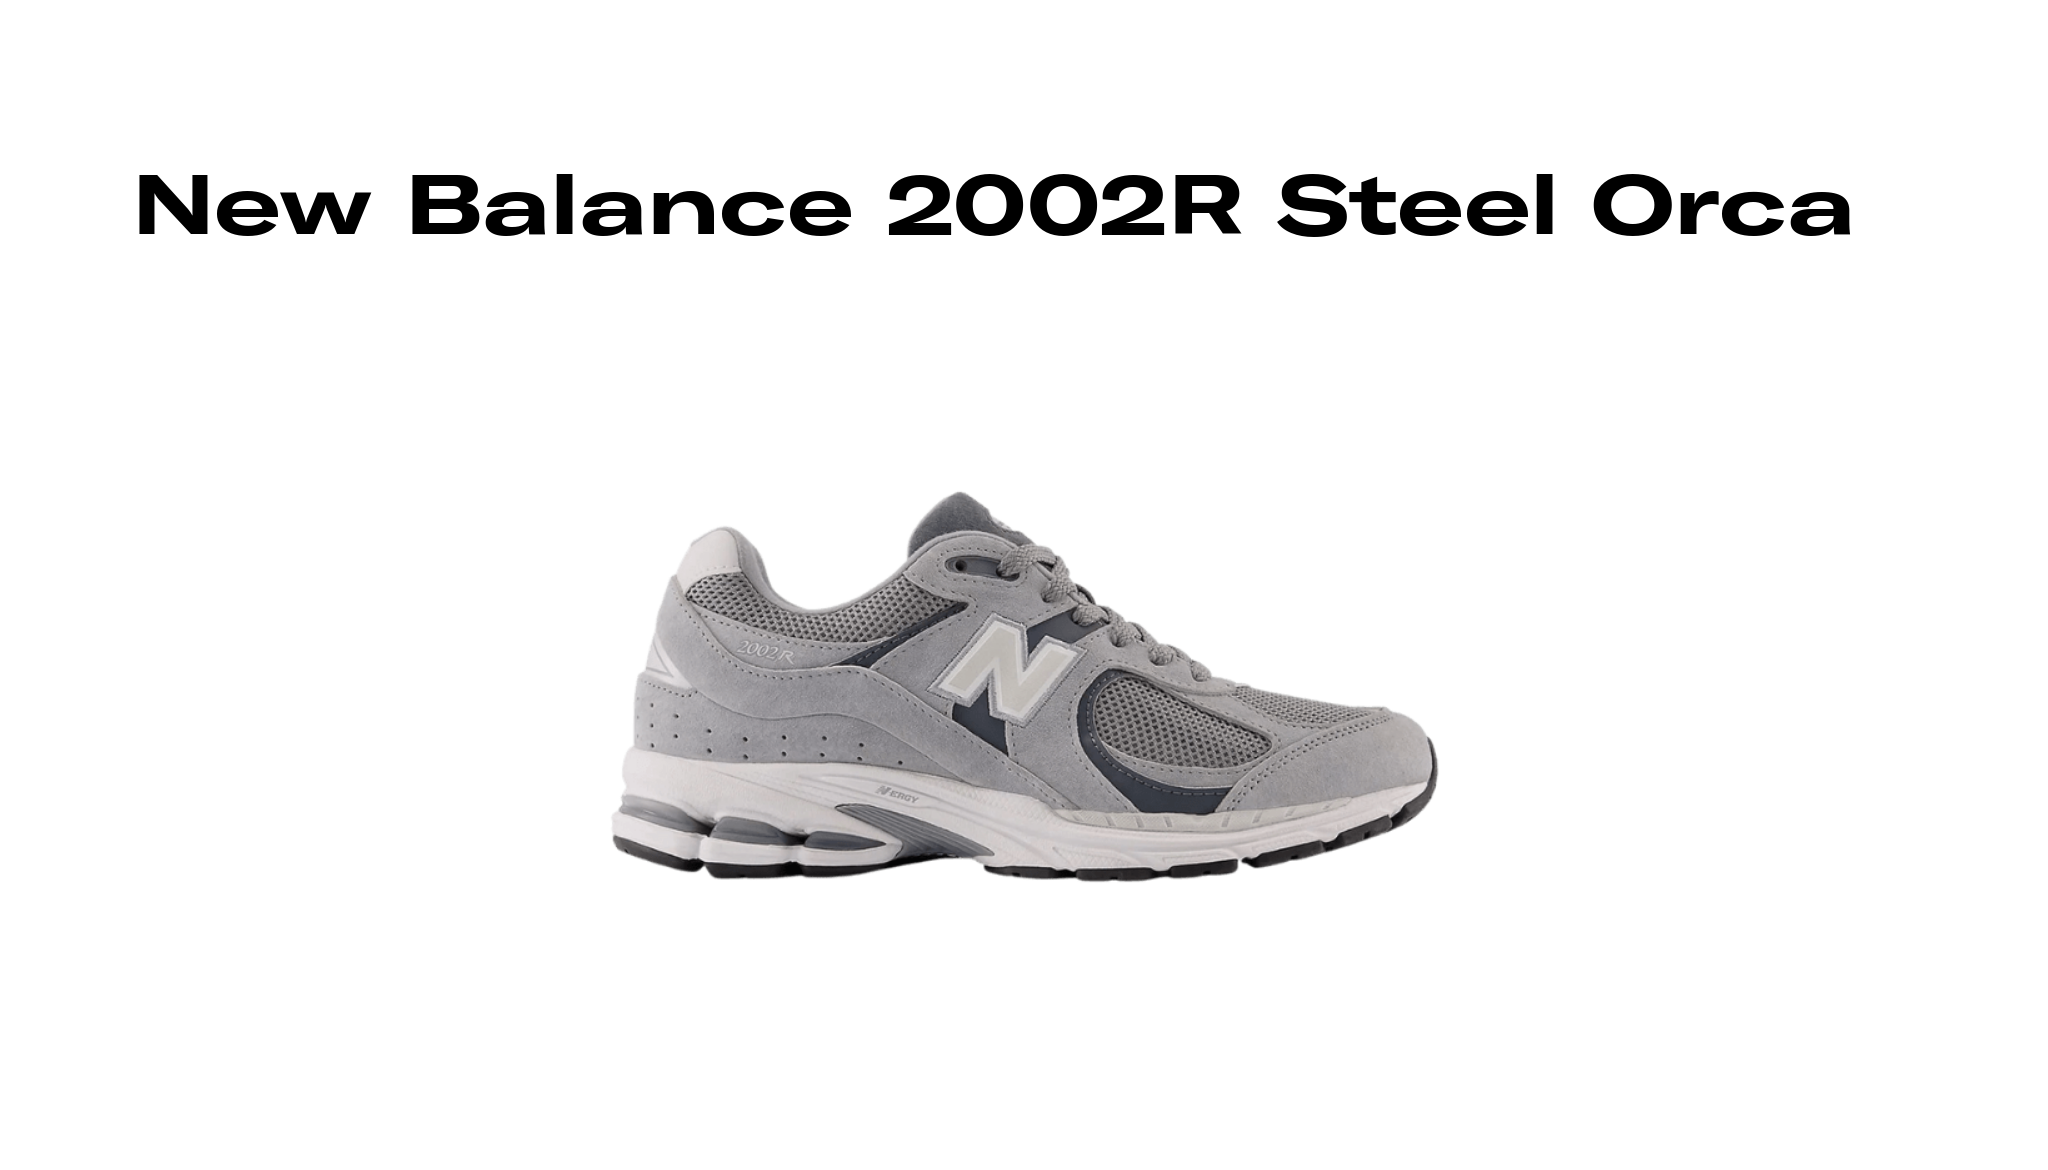 New Balance 2002R Steel Orca Release Date, Raffles, and Where to Buy